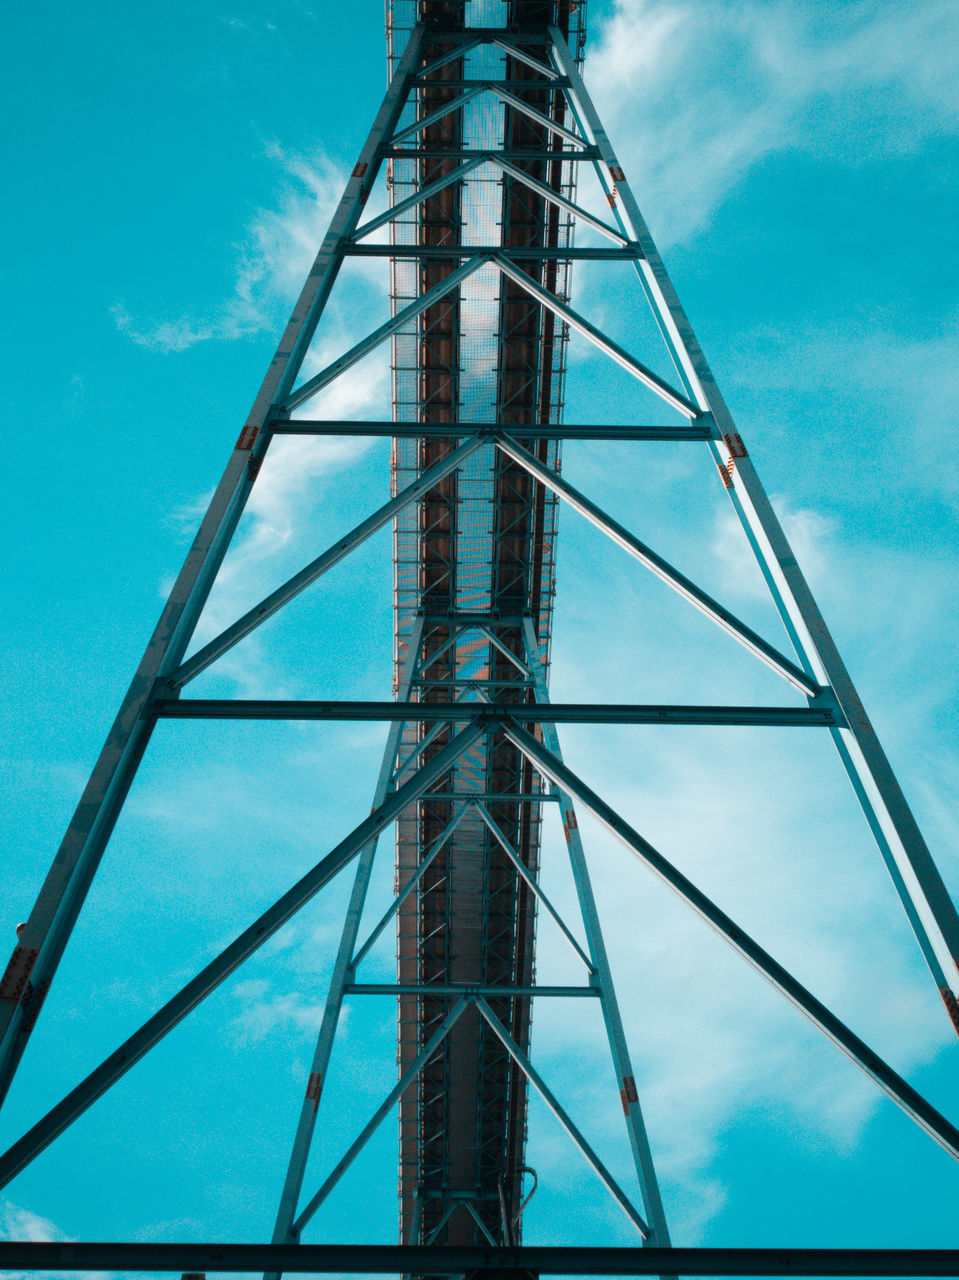 sky, low angle view, blue, built structure, architecture, cloud - sky, metal, day, nature, no people, tower, tall - high, outdoors, ladder, industry, connection, construction industry, directly below, grid, pattern, steel, power supply, alloy, turquoise colored